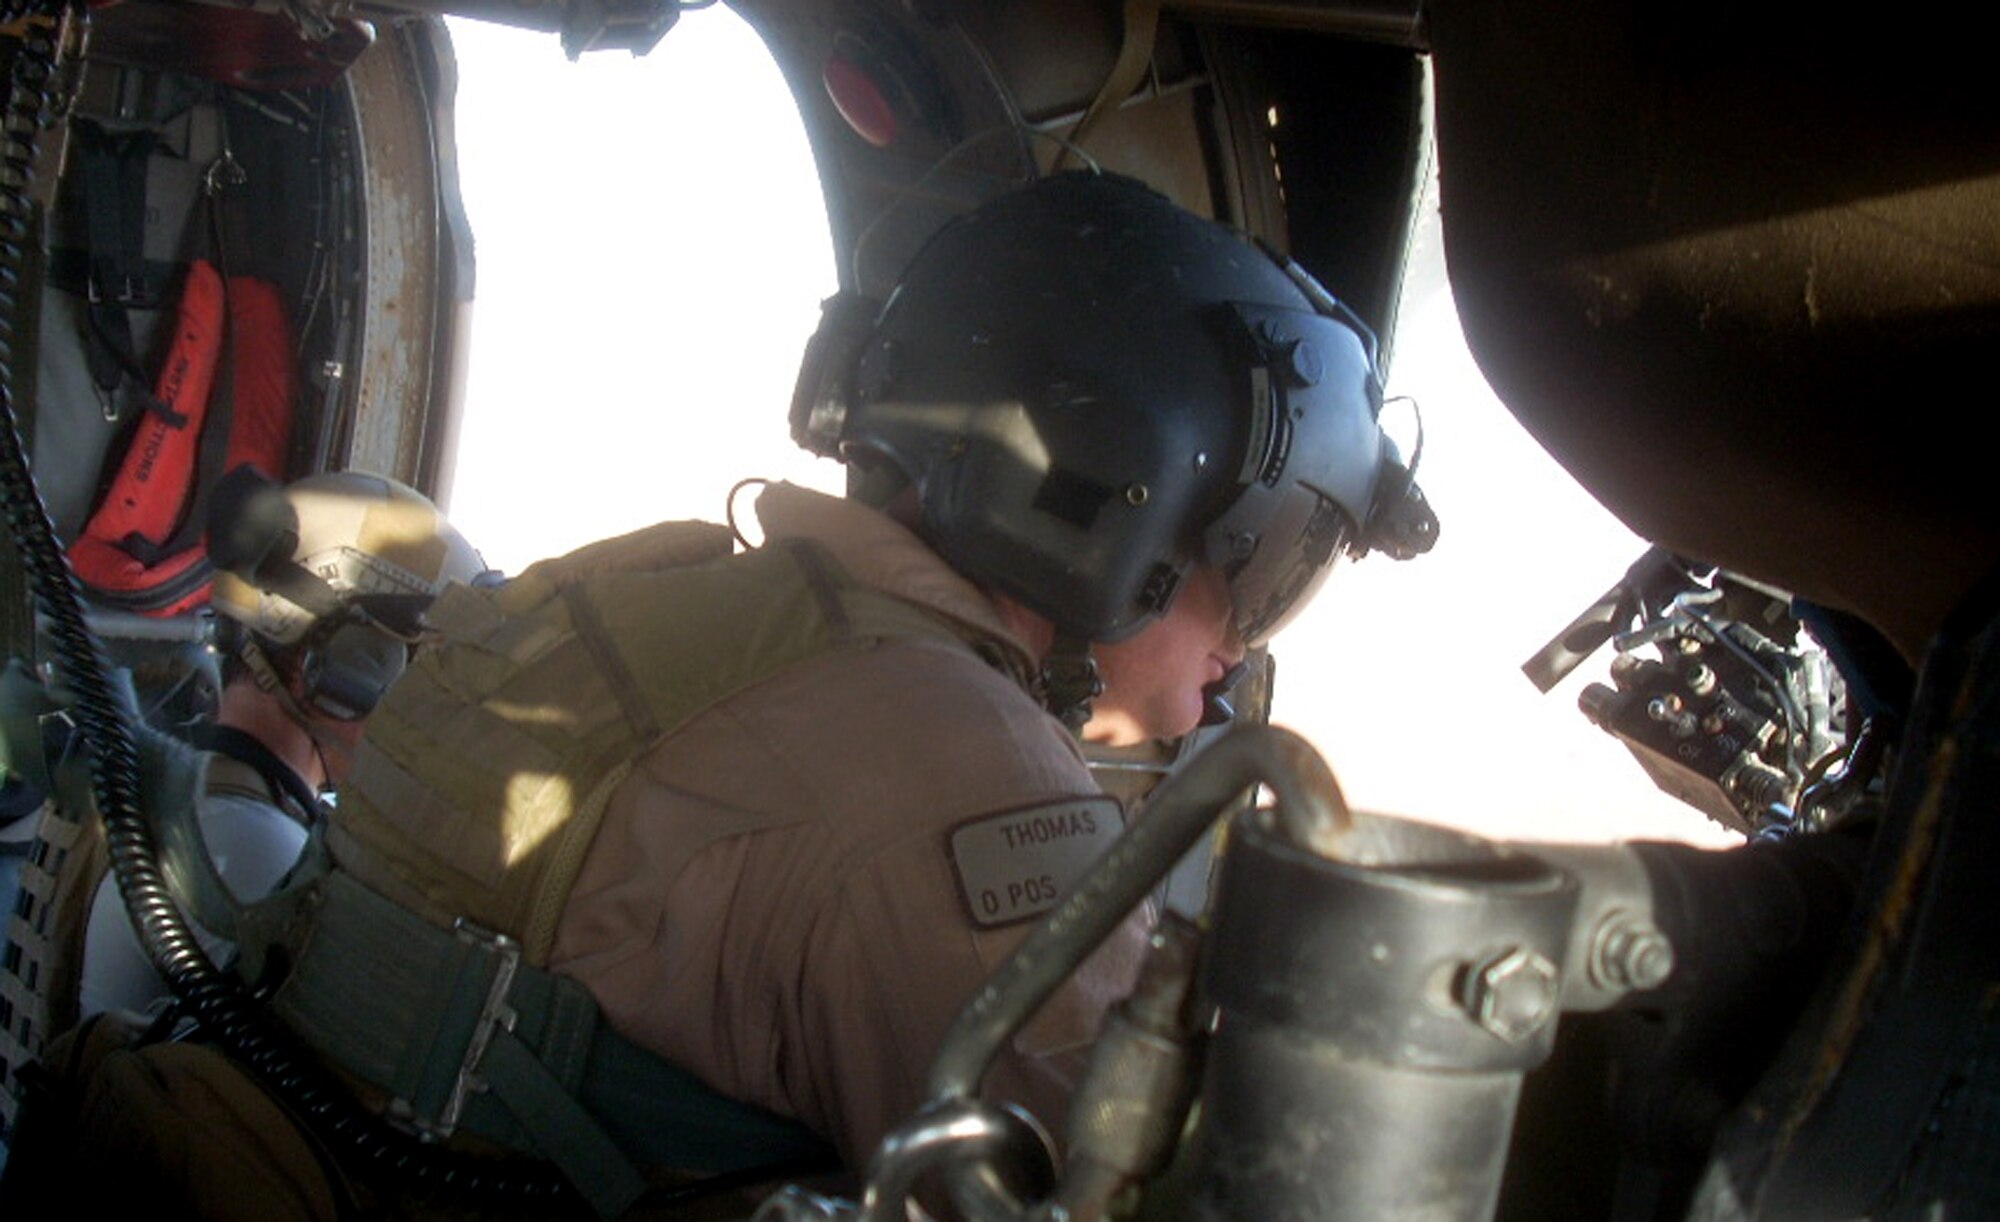 Master Sgt. Dustin Thomas, HH-60G aerial gunner, scans the terrain for threats in Afghanistan July 17, 2009. Sergeant Thomas, along with Capt. Robert Rosebrough, 1st Lt. Lucas Will, and Staff Sgt. Tim Philpott, members of the 33rd Rescue Squadron at Kadena Air Base, Japan, were recently announced as the winners of the MacKay Trophy and the Jolly Green Association Award for a mission to rescue Army Soldiers and fellow Airmen July 29, 2009 during their deployment to Kandahar Air Base, Afghanistan. At the time of the mission they were attached to the 129th ERQS. (Courtesy Photo)